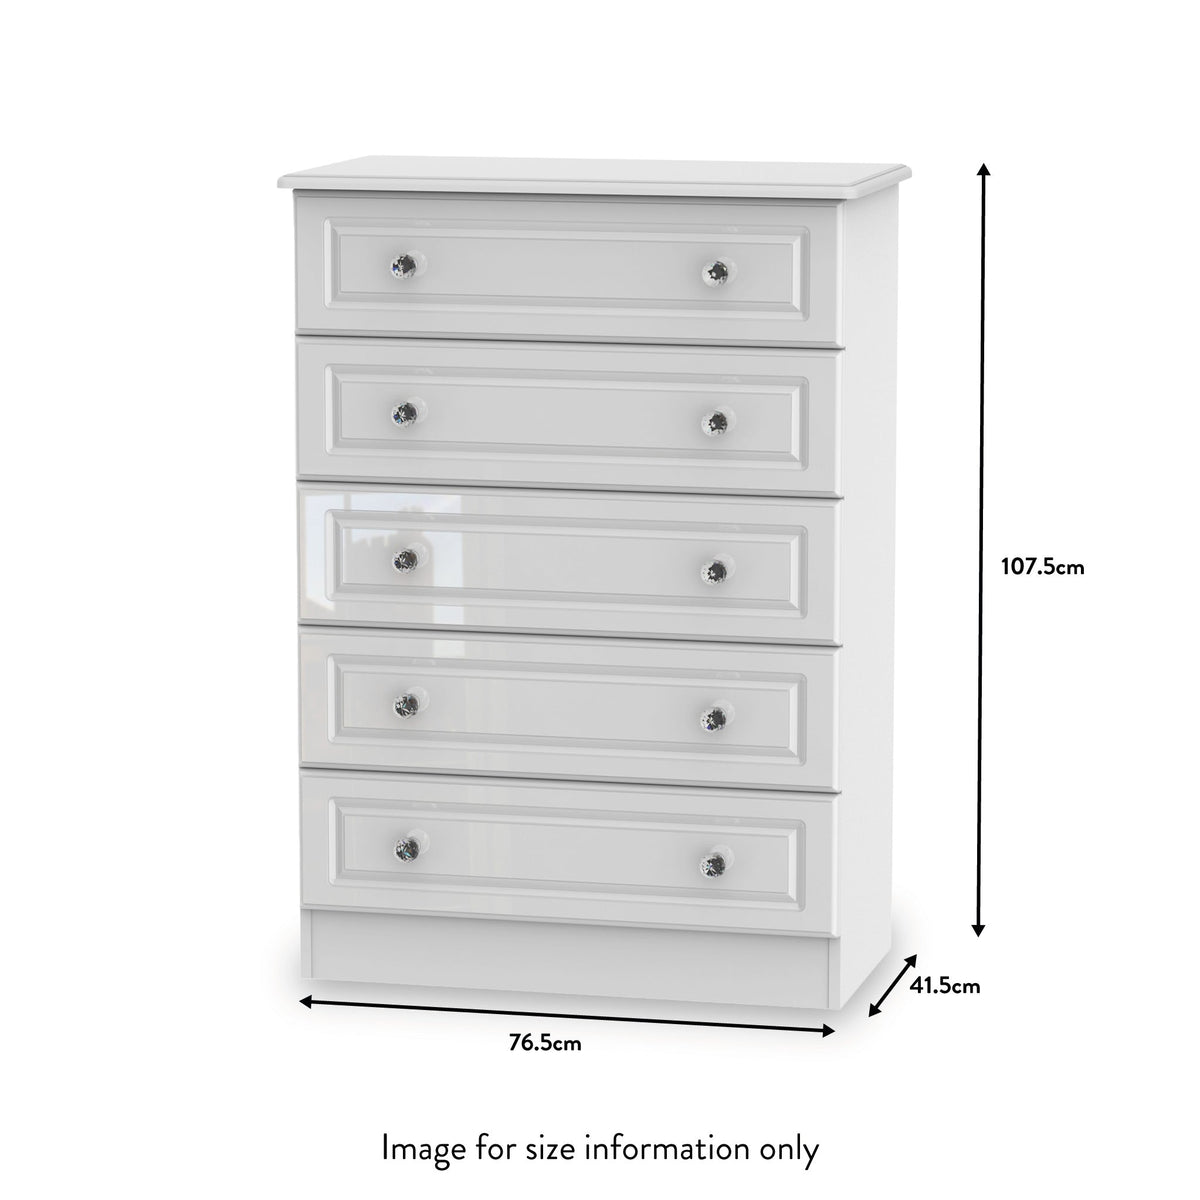 Kinsley White Gloss 3 Drawer Chest from Roseland size